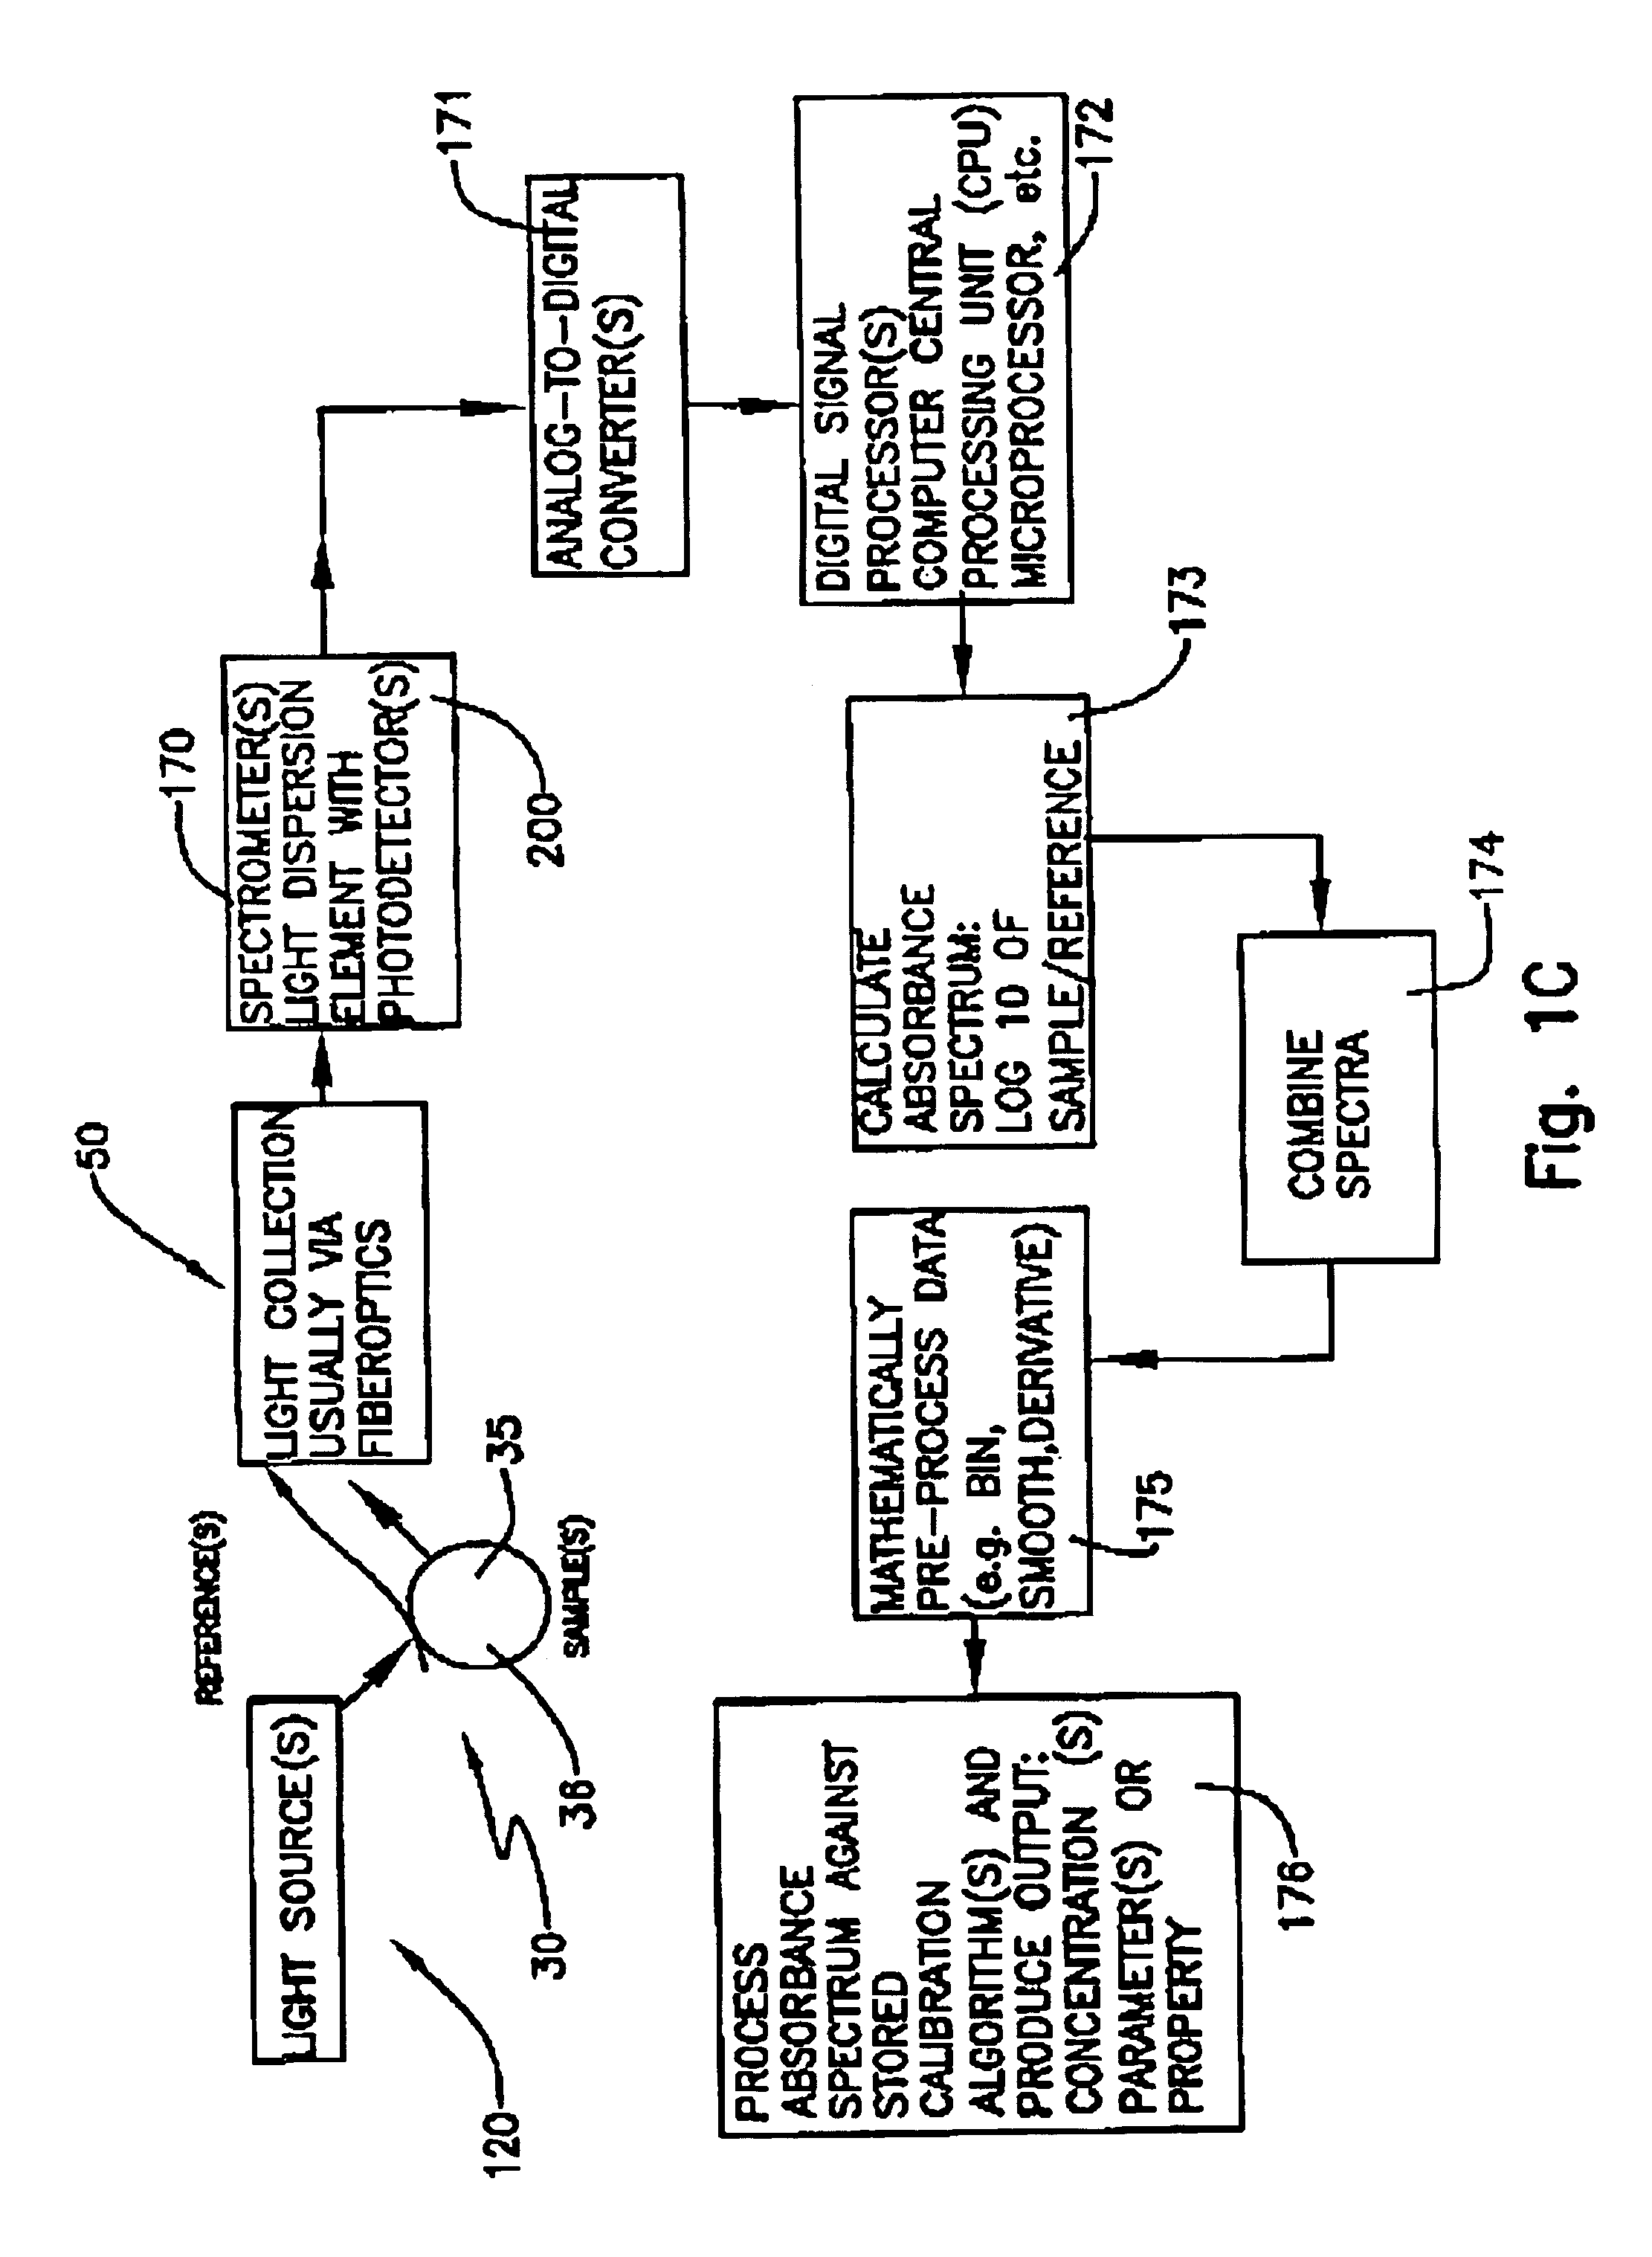 Apparatus and method and techniques for measuring and correlating characteristics of fruit with visible/near infra-red spectrum